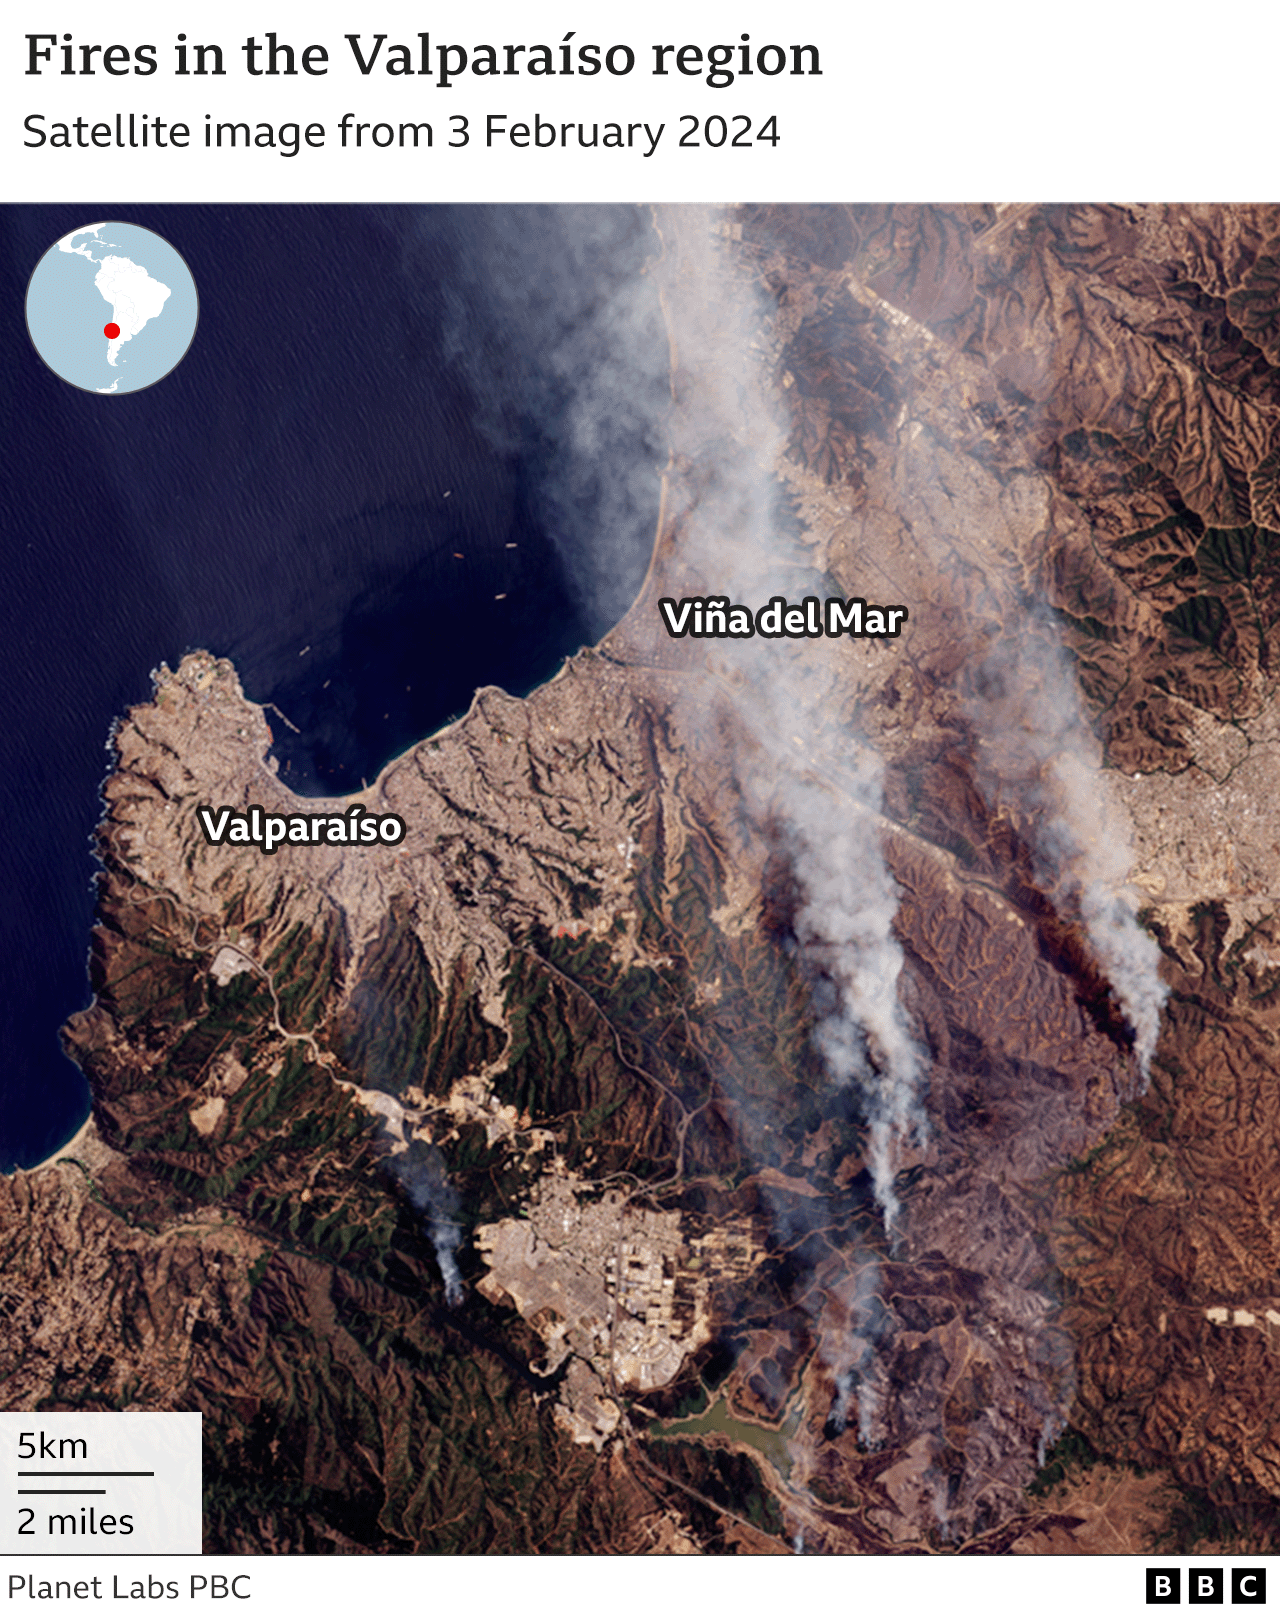 Satellite image shows fires in the Valparaíso region